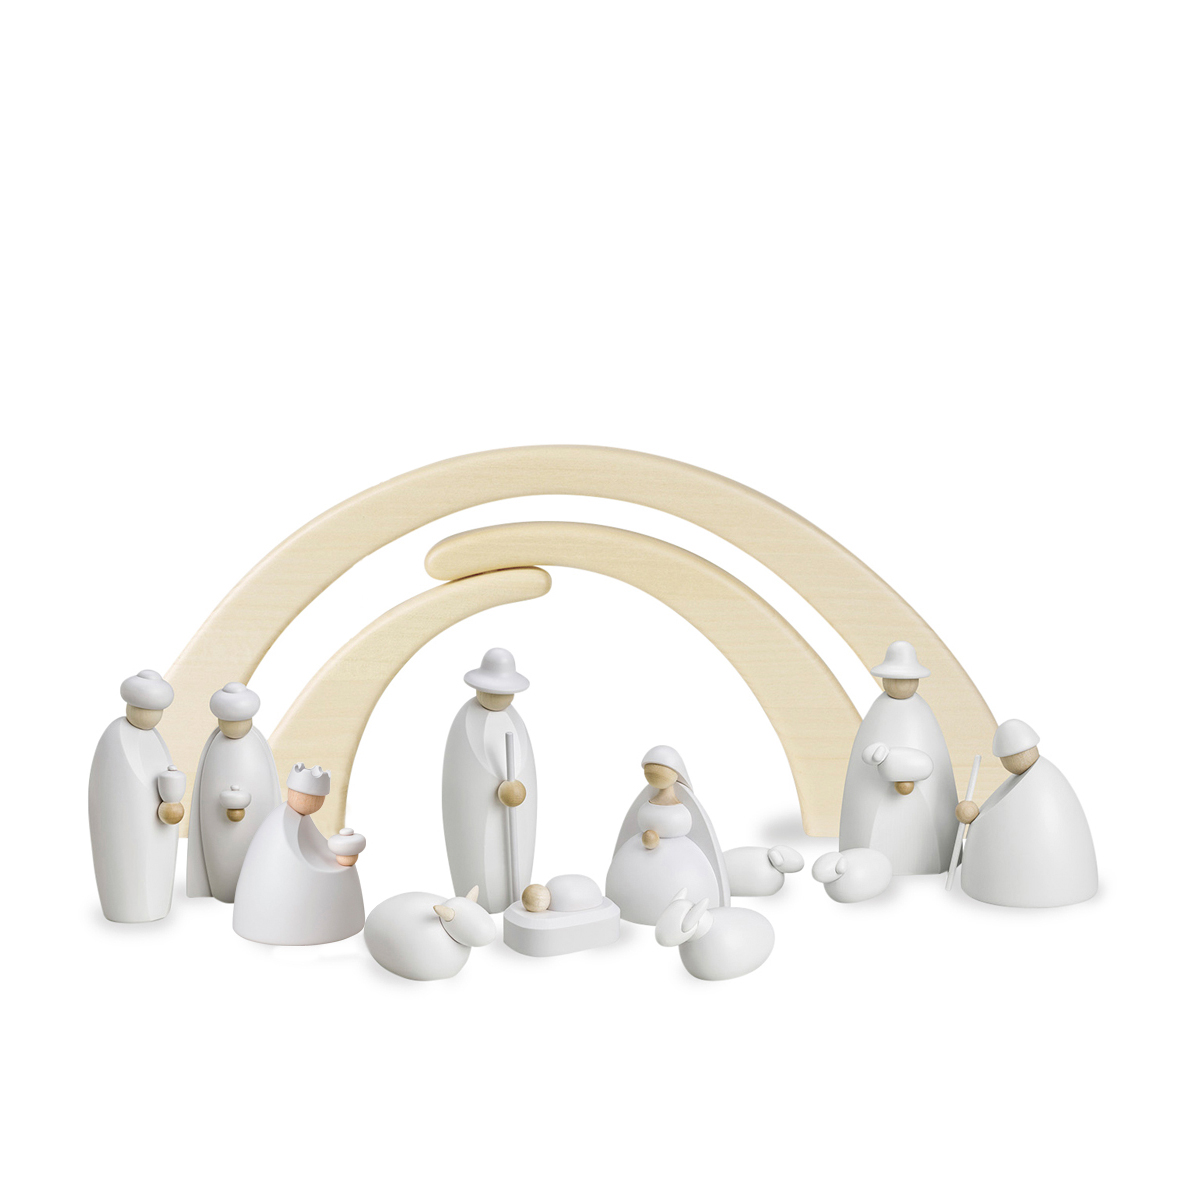 Set of 12 crib figures with stable, small, white